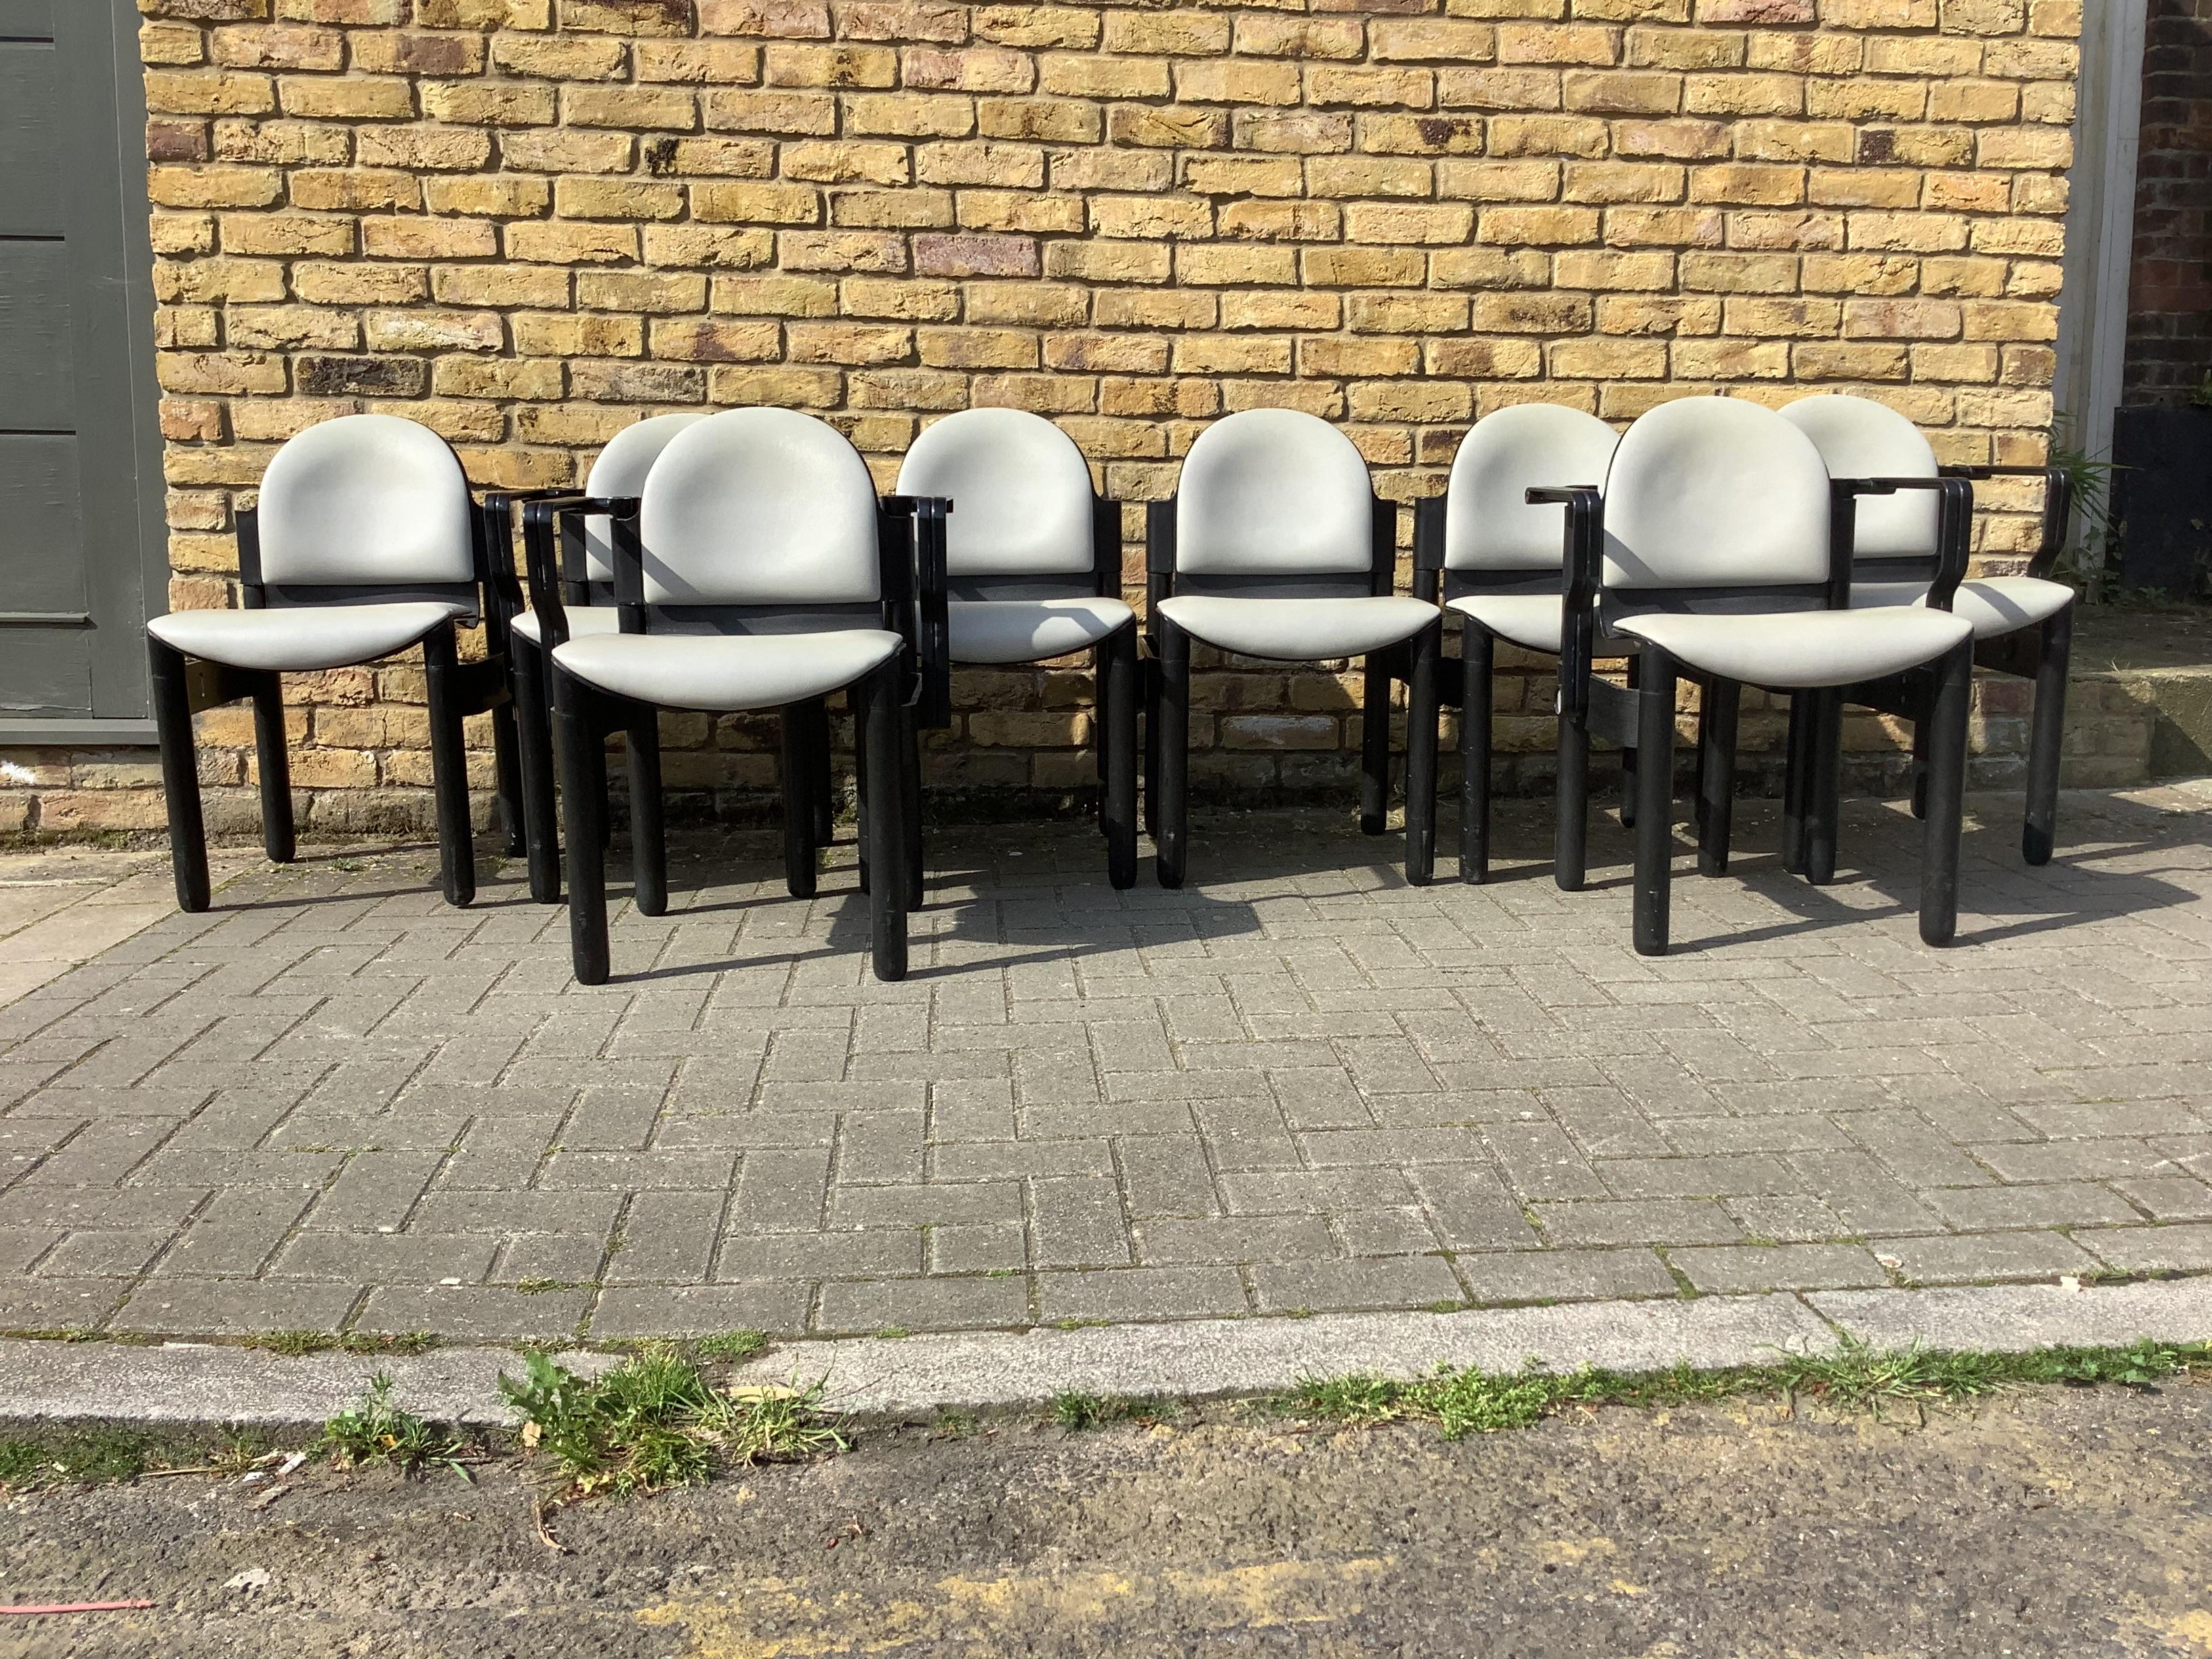 A set of 8 stackable chairs by Gerd Lange in 1973 and produced by Thonet
Each chair feature an ash bentwood frame ,solid ash legs ,black lacquered 
Aluminum armrests ,and PVC seats chairs and stamped underneath Thonet 
4 cravers and 4 chairs